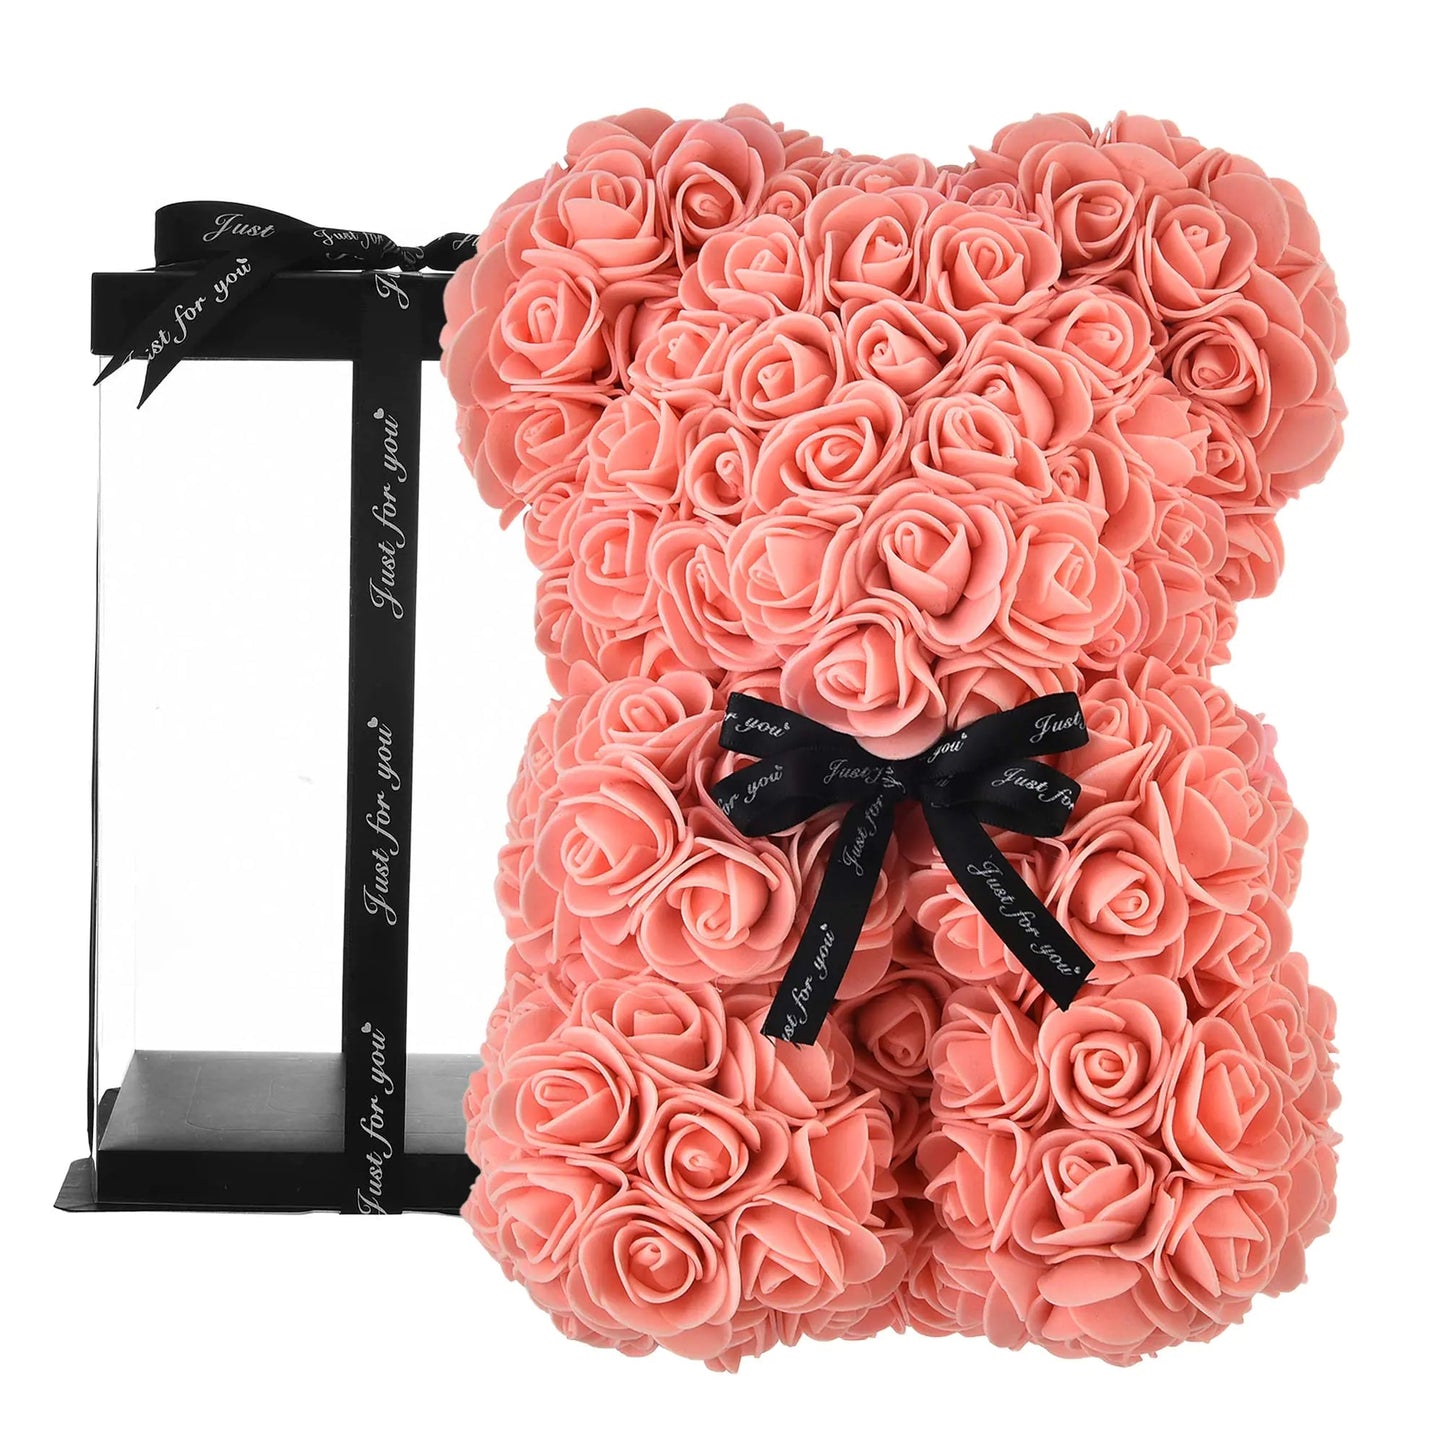 Presenting BlossomBear: A Timeless Expression of Love